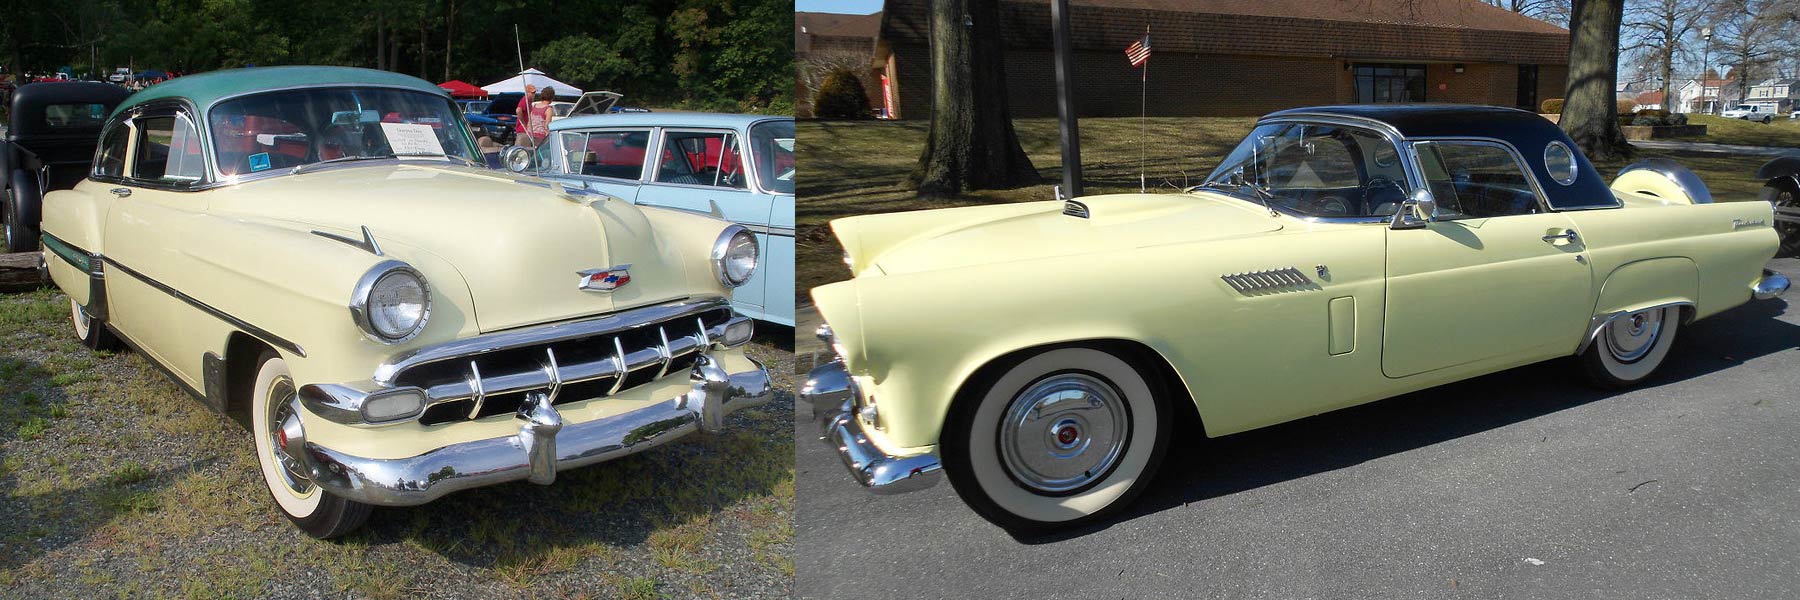 Collage of two antique vehicles, both with a very light yellow color